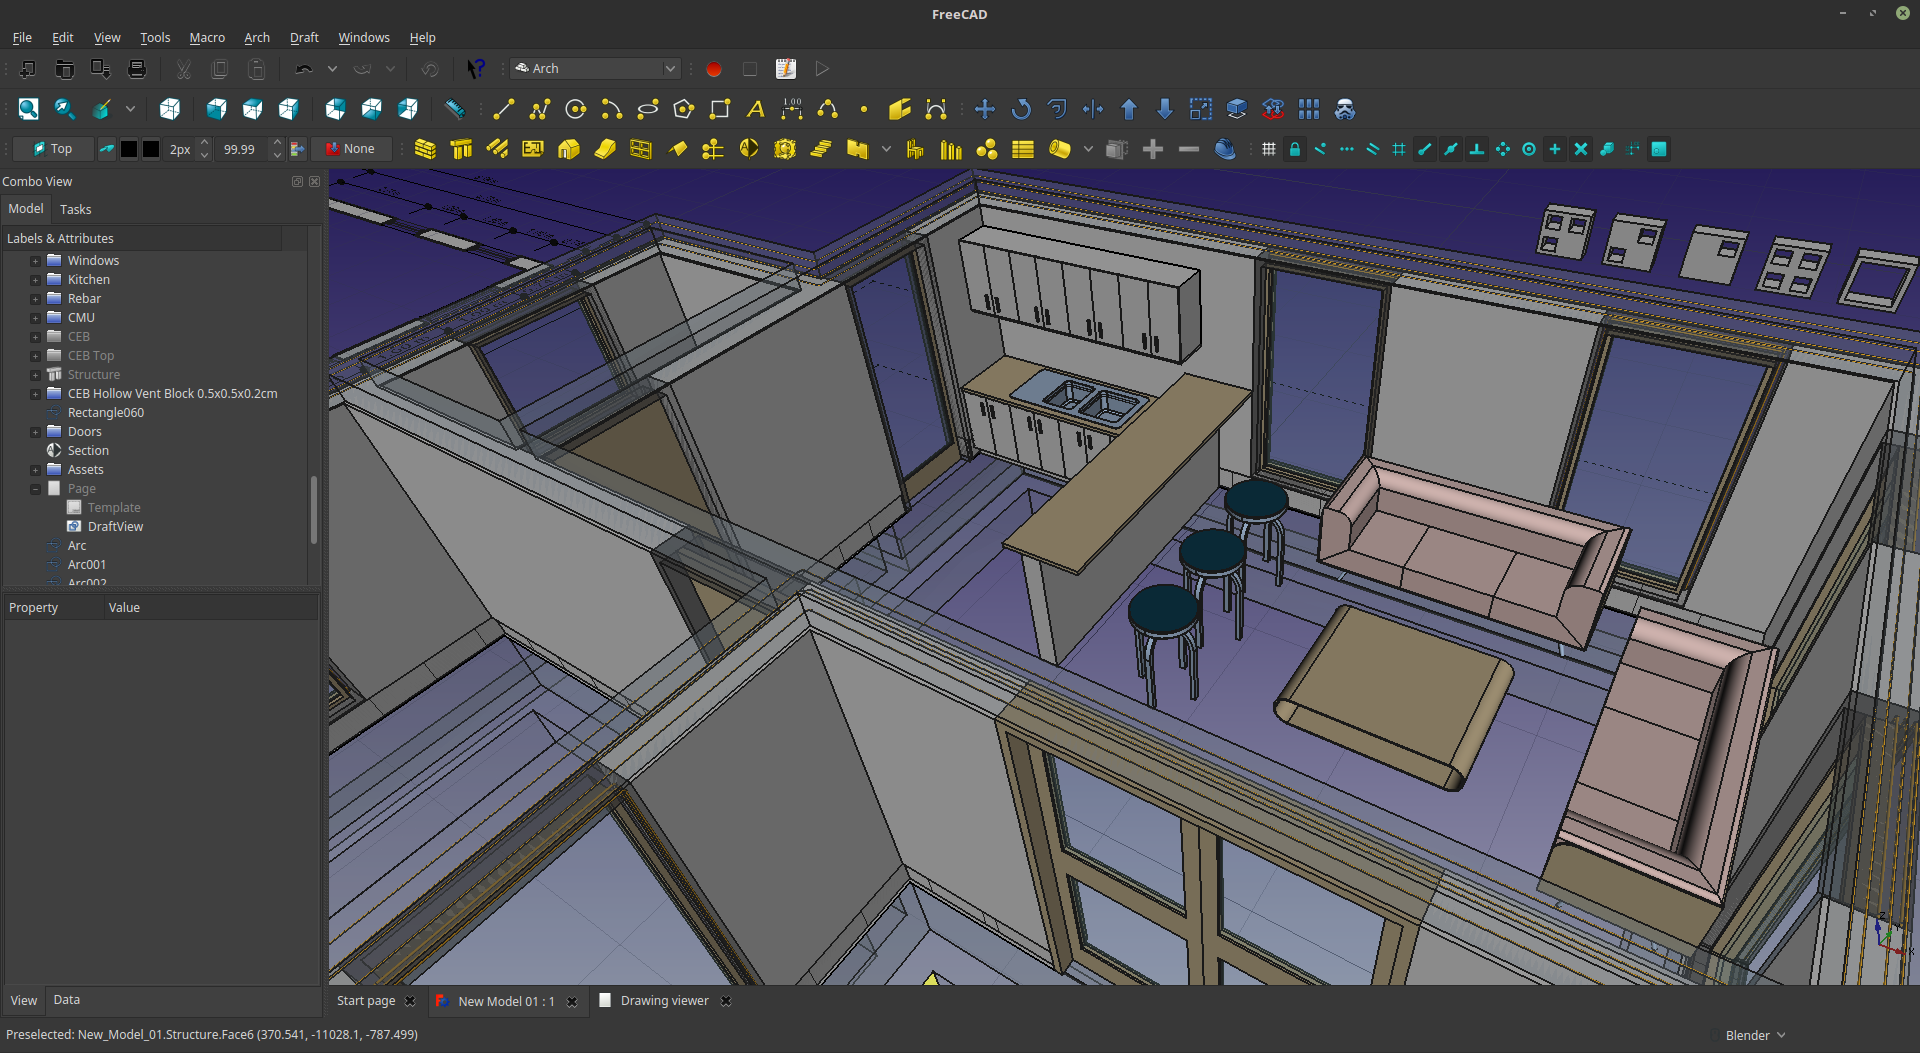 Perspective view of a house layout in FreeCAD